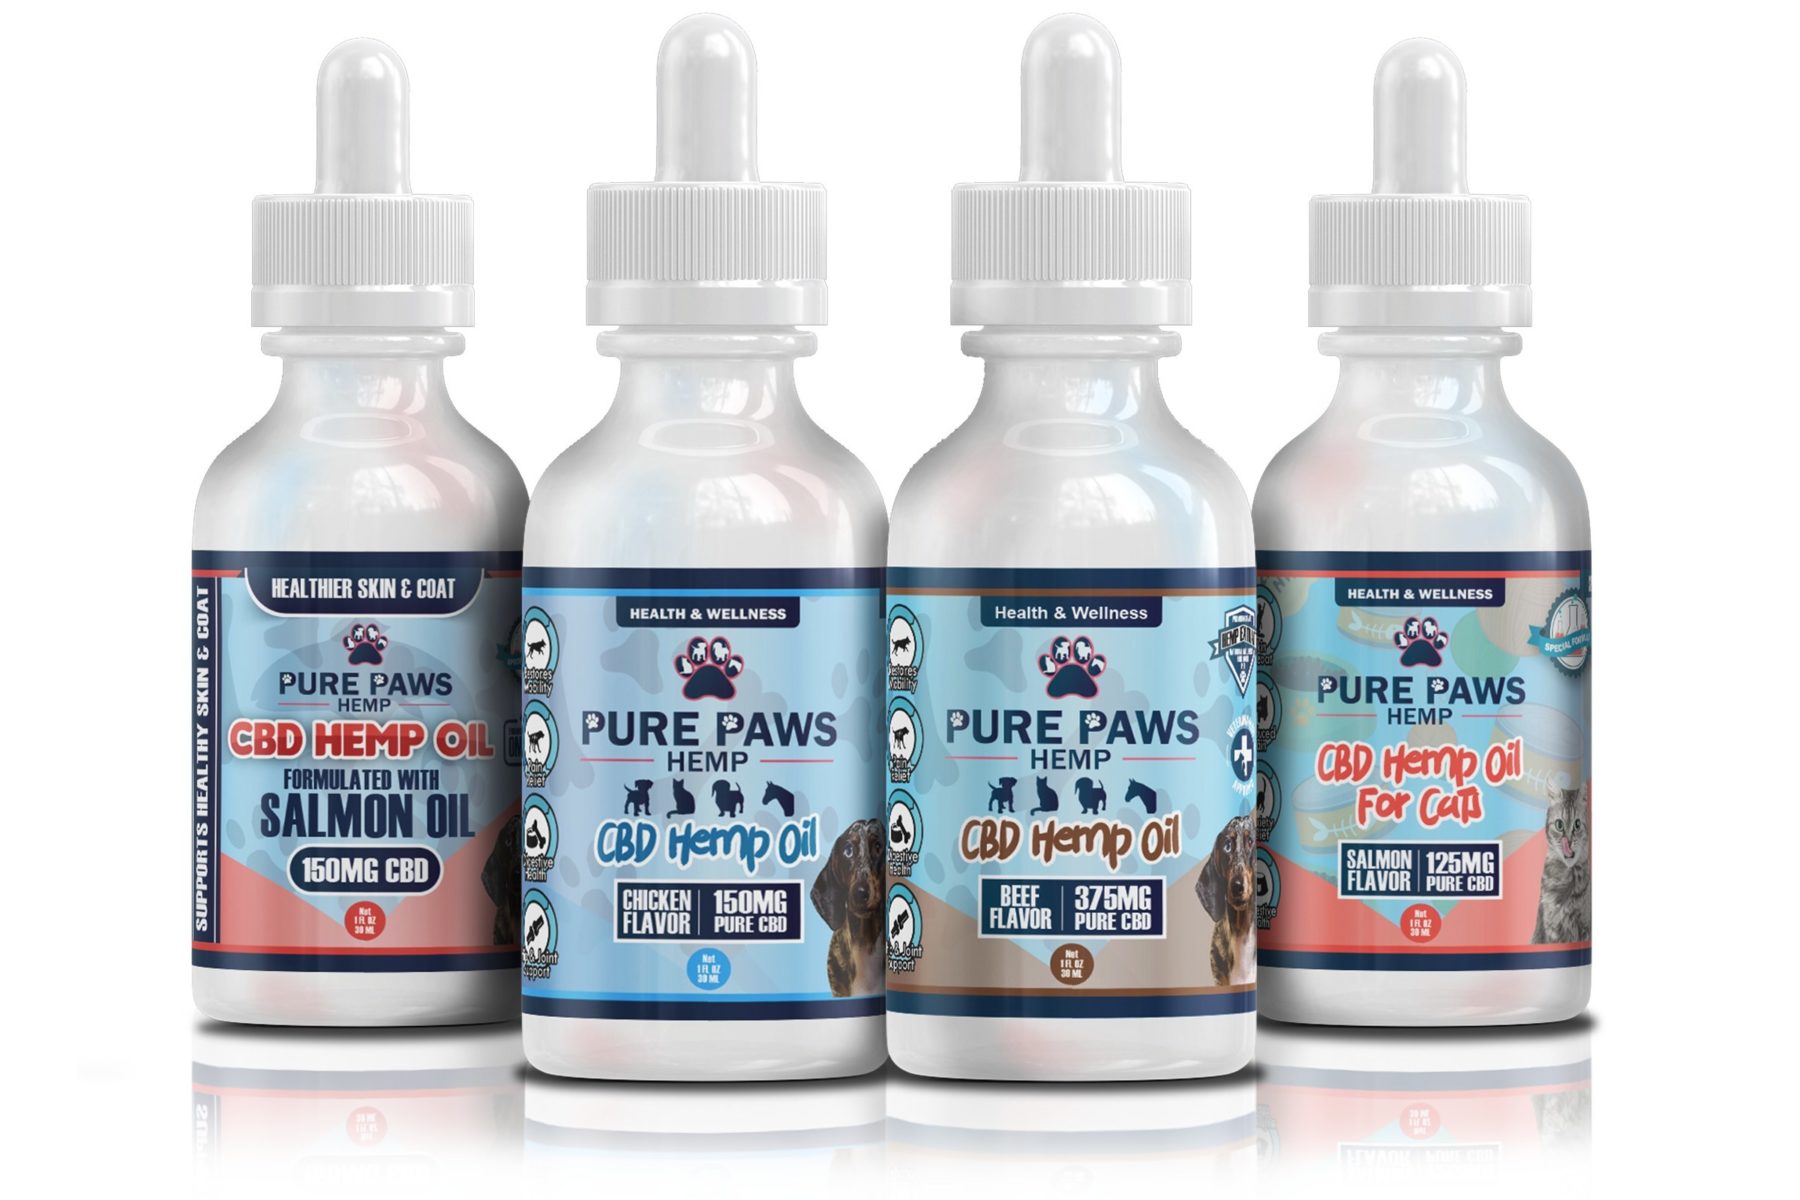 Pure Paws Hemp is a team of animal lovers passionate about natural health care for pets. We conduct independent third-party lab tests to verify the purity of our products. With Pure Paws Hemp, we designed a unique, human-grade product line that will help your pets look and feel their best. Our products contain no unnecessary chemicals and include CBD dog biscuits, paw butter, pet shampoo, pet oil, and cat oil.